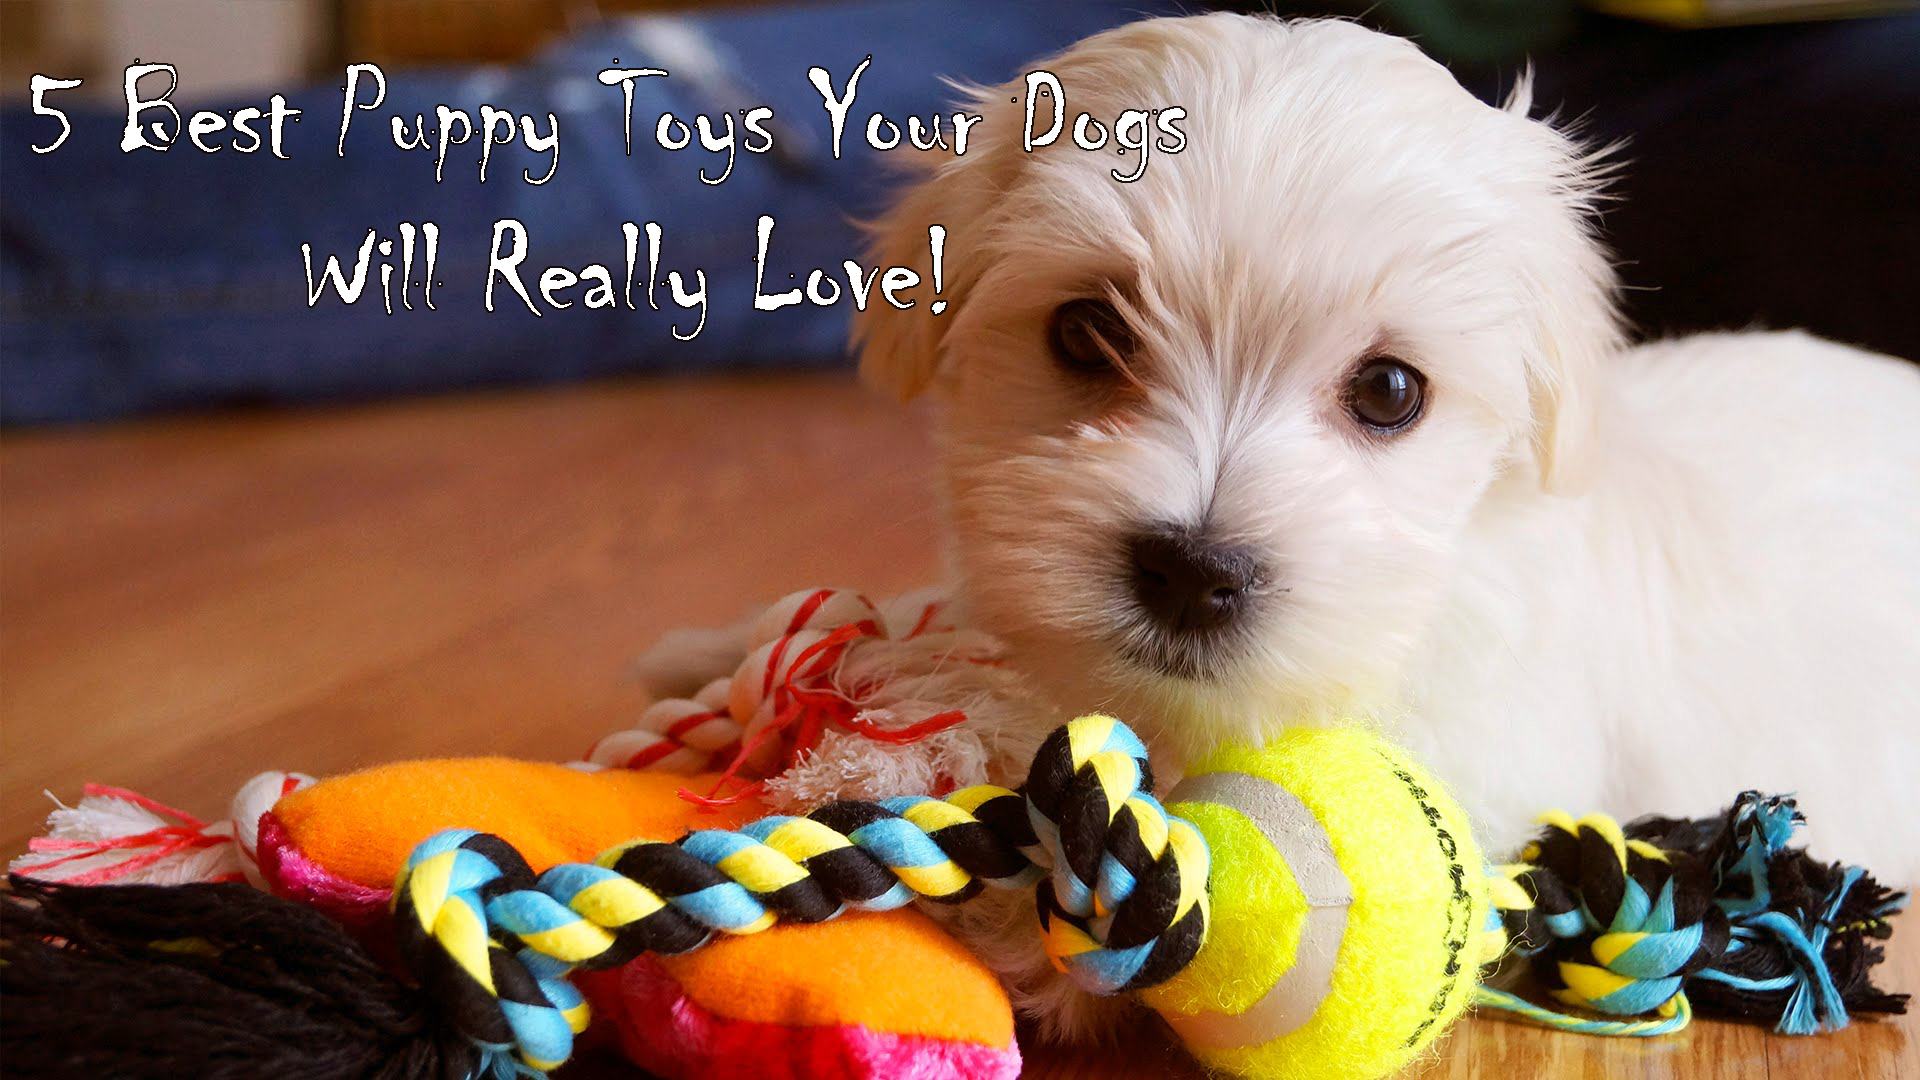 5 Best Puppy Toys Your Dogs Will Really Love!